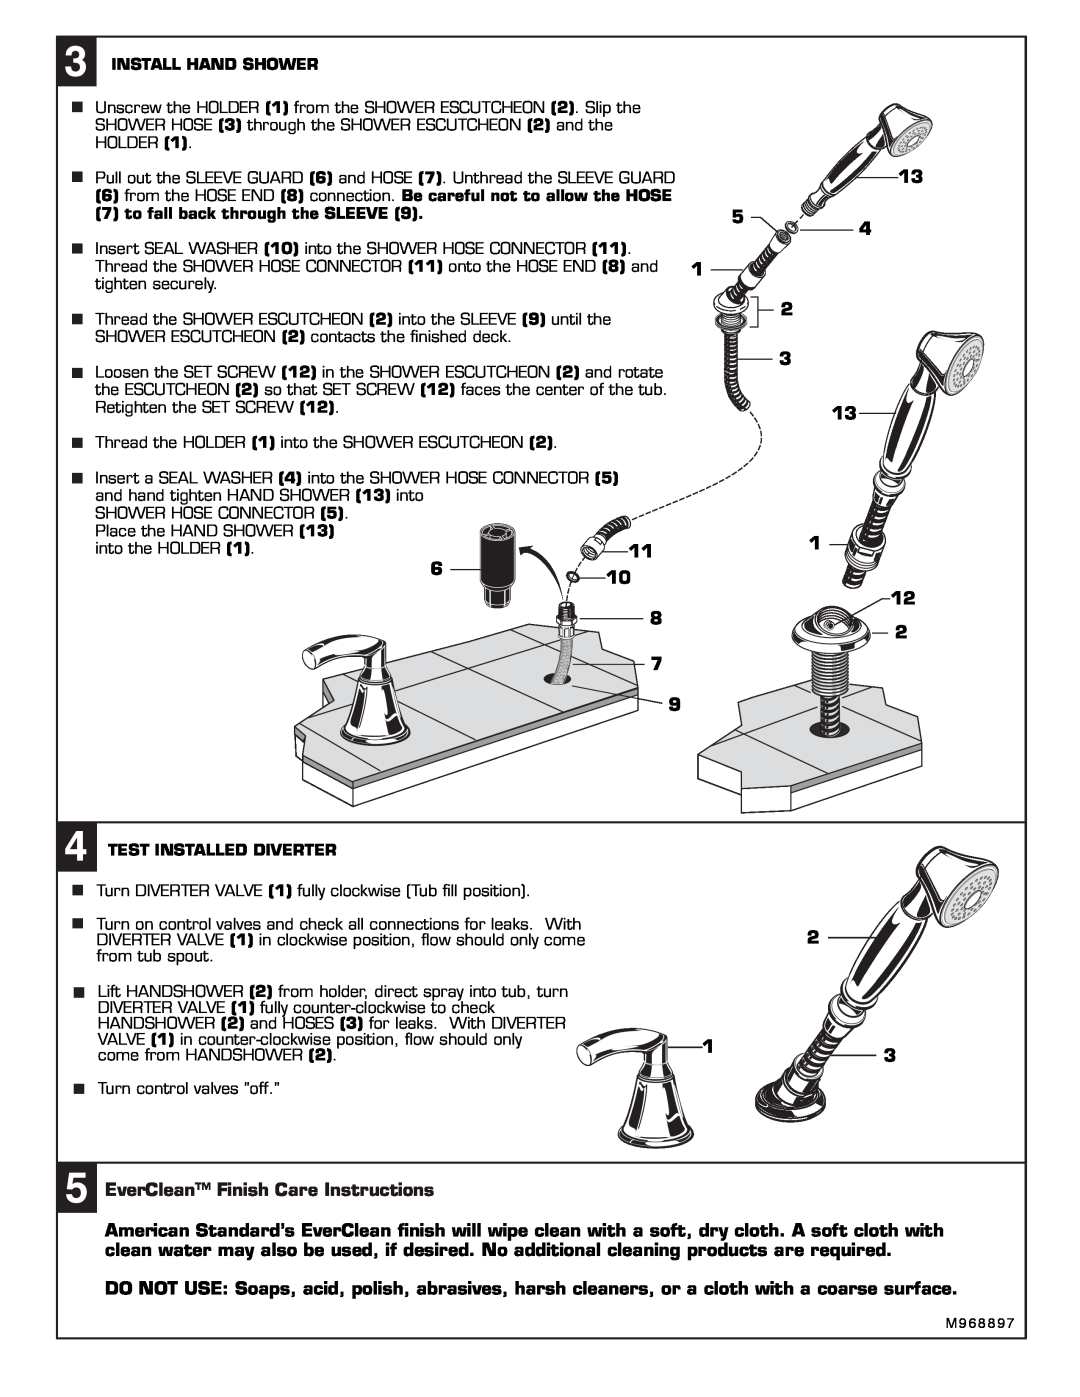 American Standard T038.990 EverClean Finish Care Instructions, Install Hand Shower, to fall back through the SLEEVE 